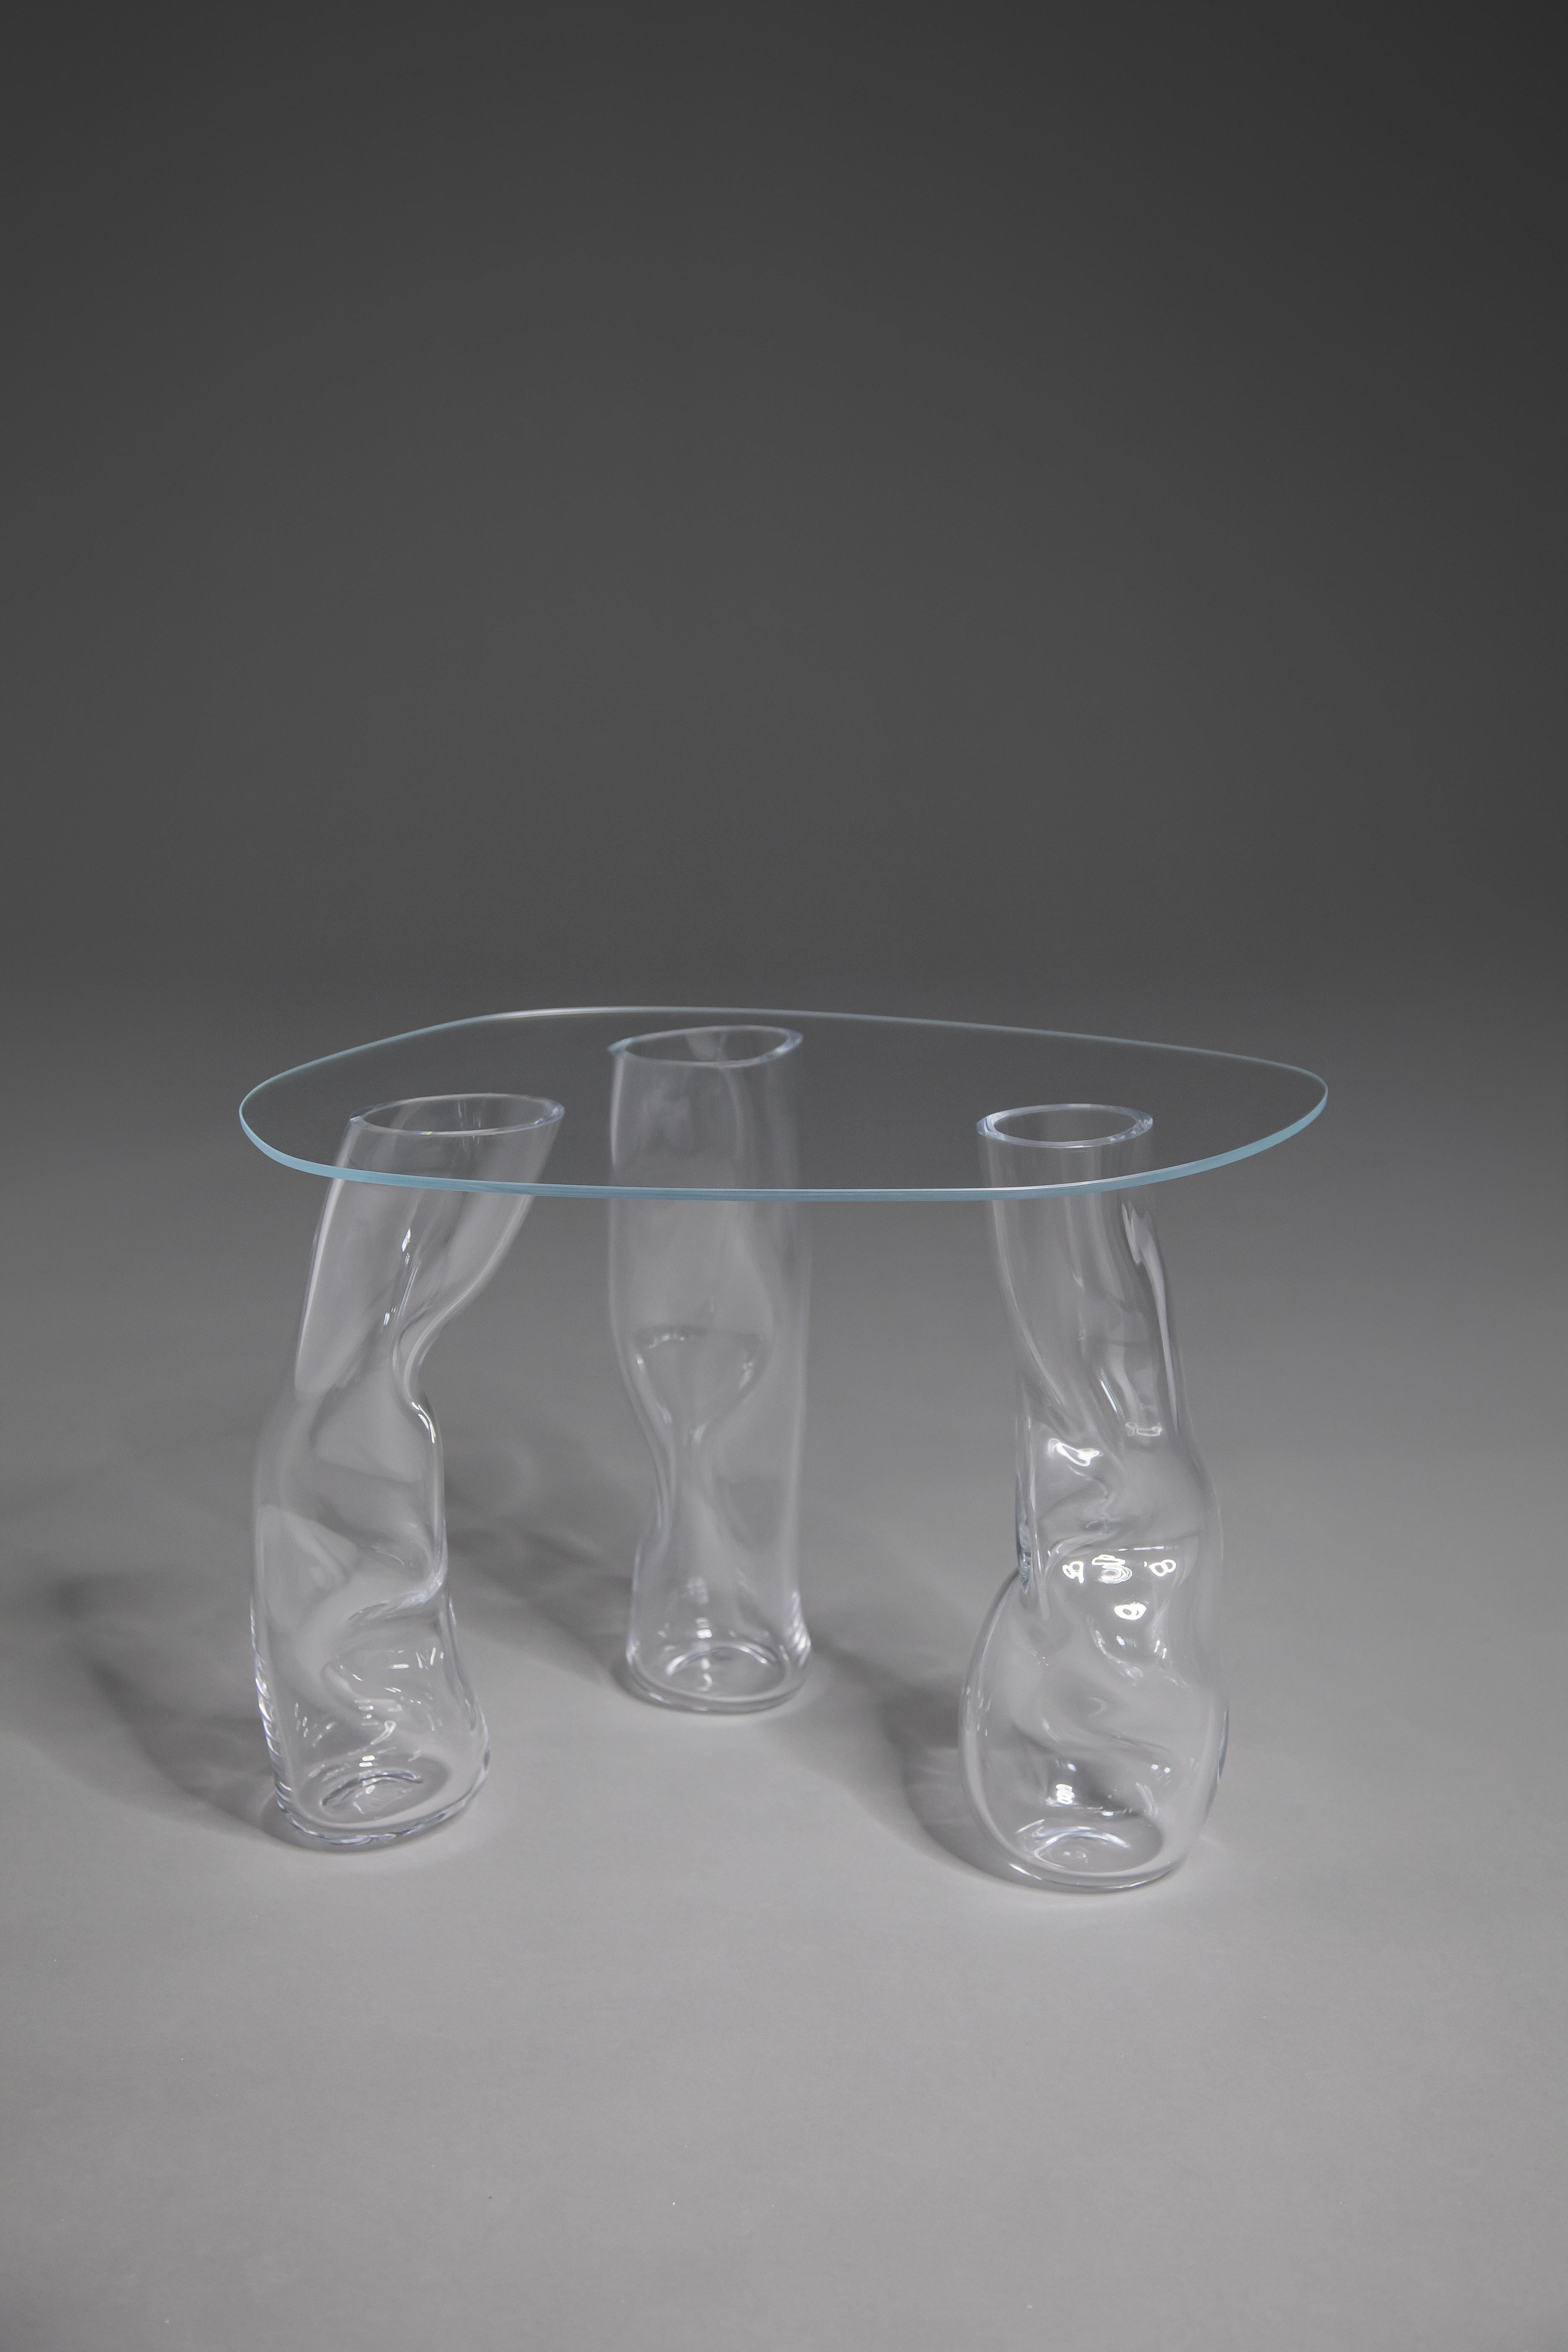 Clara Jorisch glass tables are made of blown glass and are UV glued. All tables are uniques - reminiscent of the glassblower gesture that gives each one its particular shape. 

Clara Jorisch is a designer and crafts(wo)man from Montreal. Clara’s